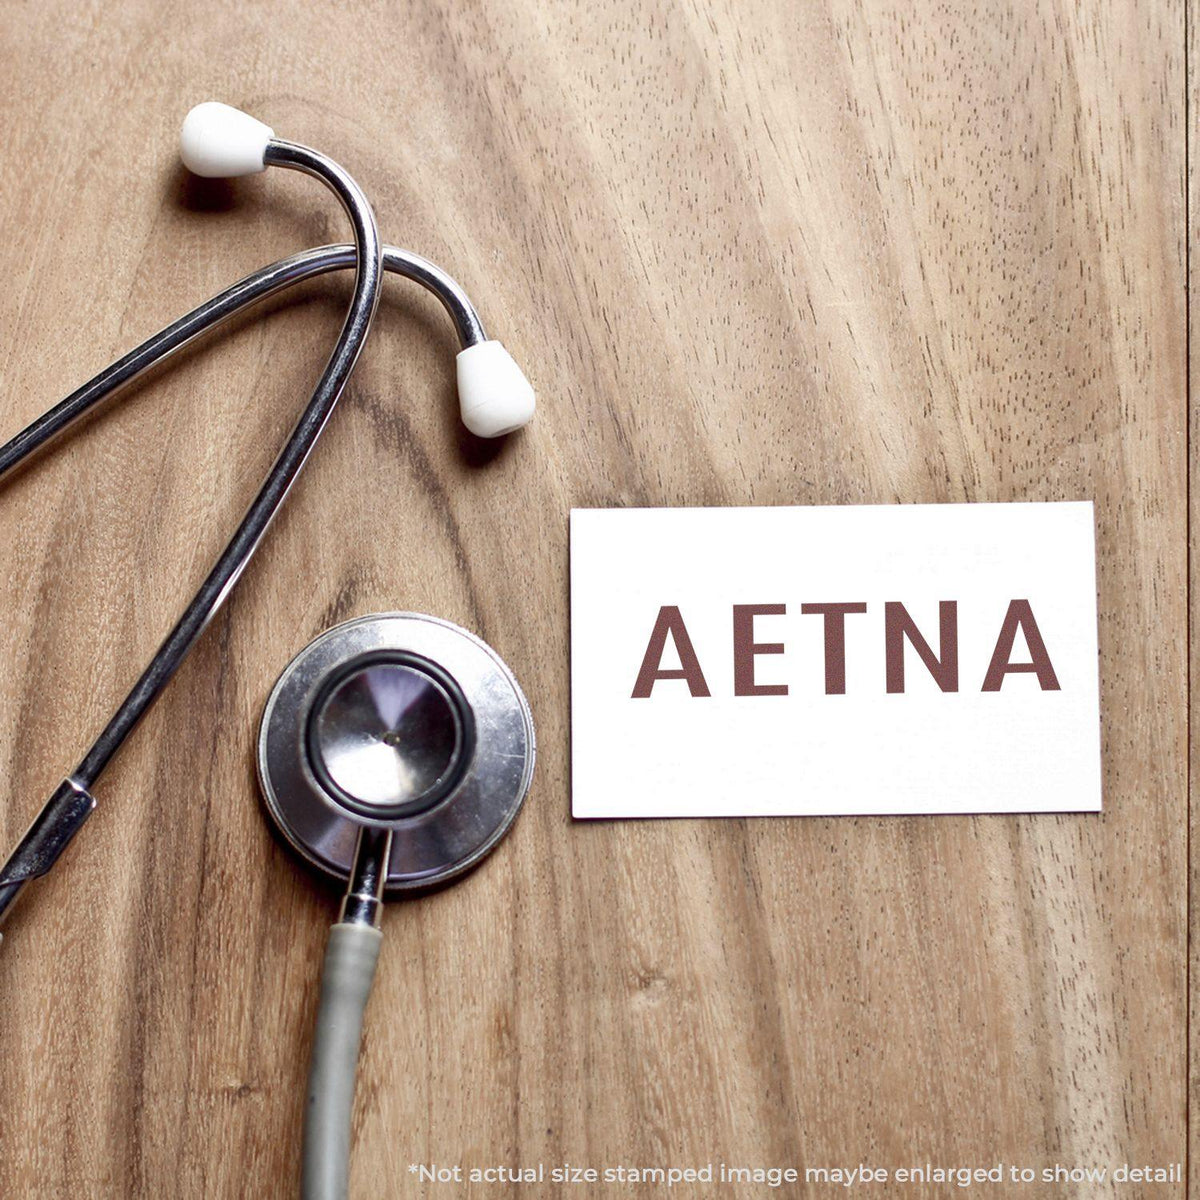 Medical Stamps Aetna Rubber Stamp - Engineer Seal Stamps - Brand_Acorn, Impression Size_Small, Stamp Type_Regular Stamp, Type of Use_Business, Type of Use_Medical Office, Type of Use_Professional